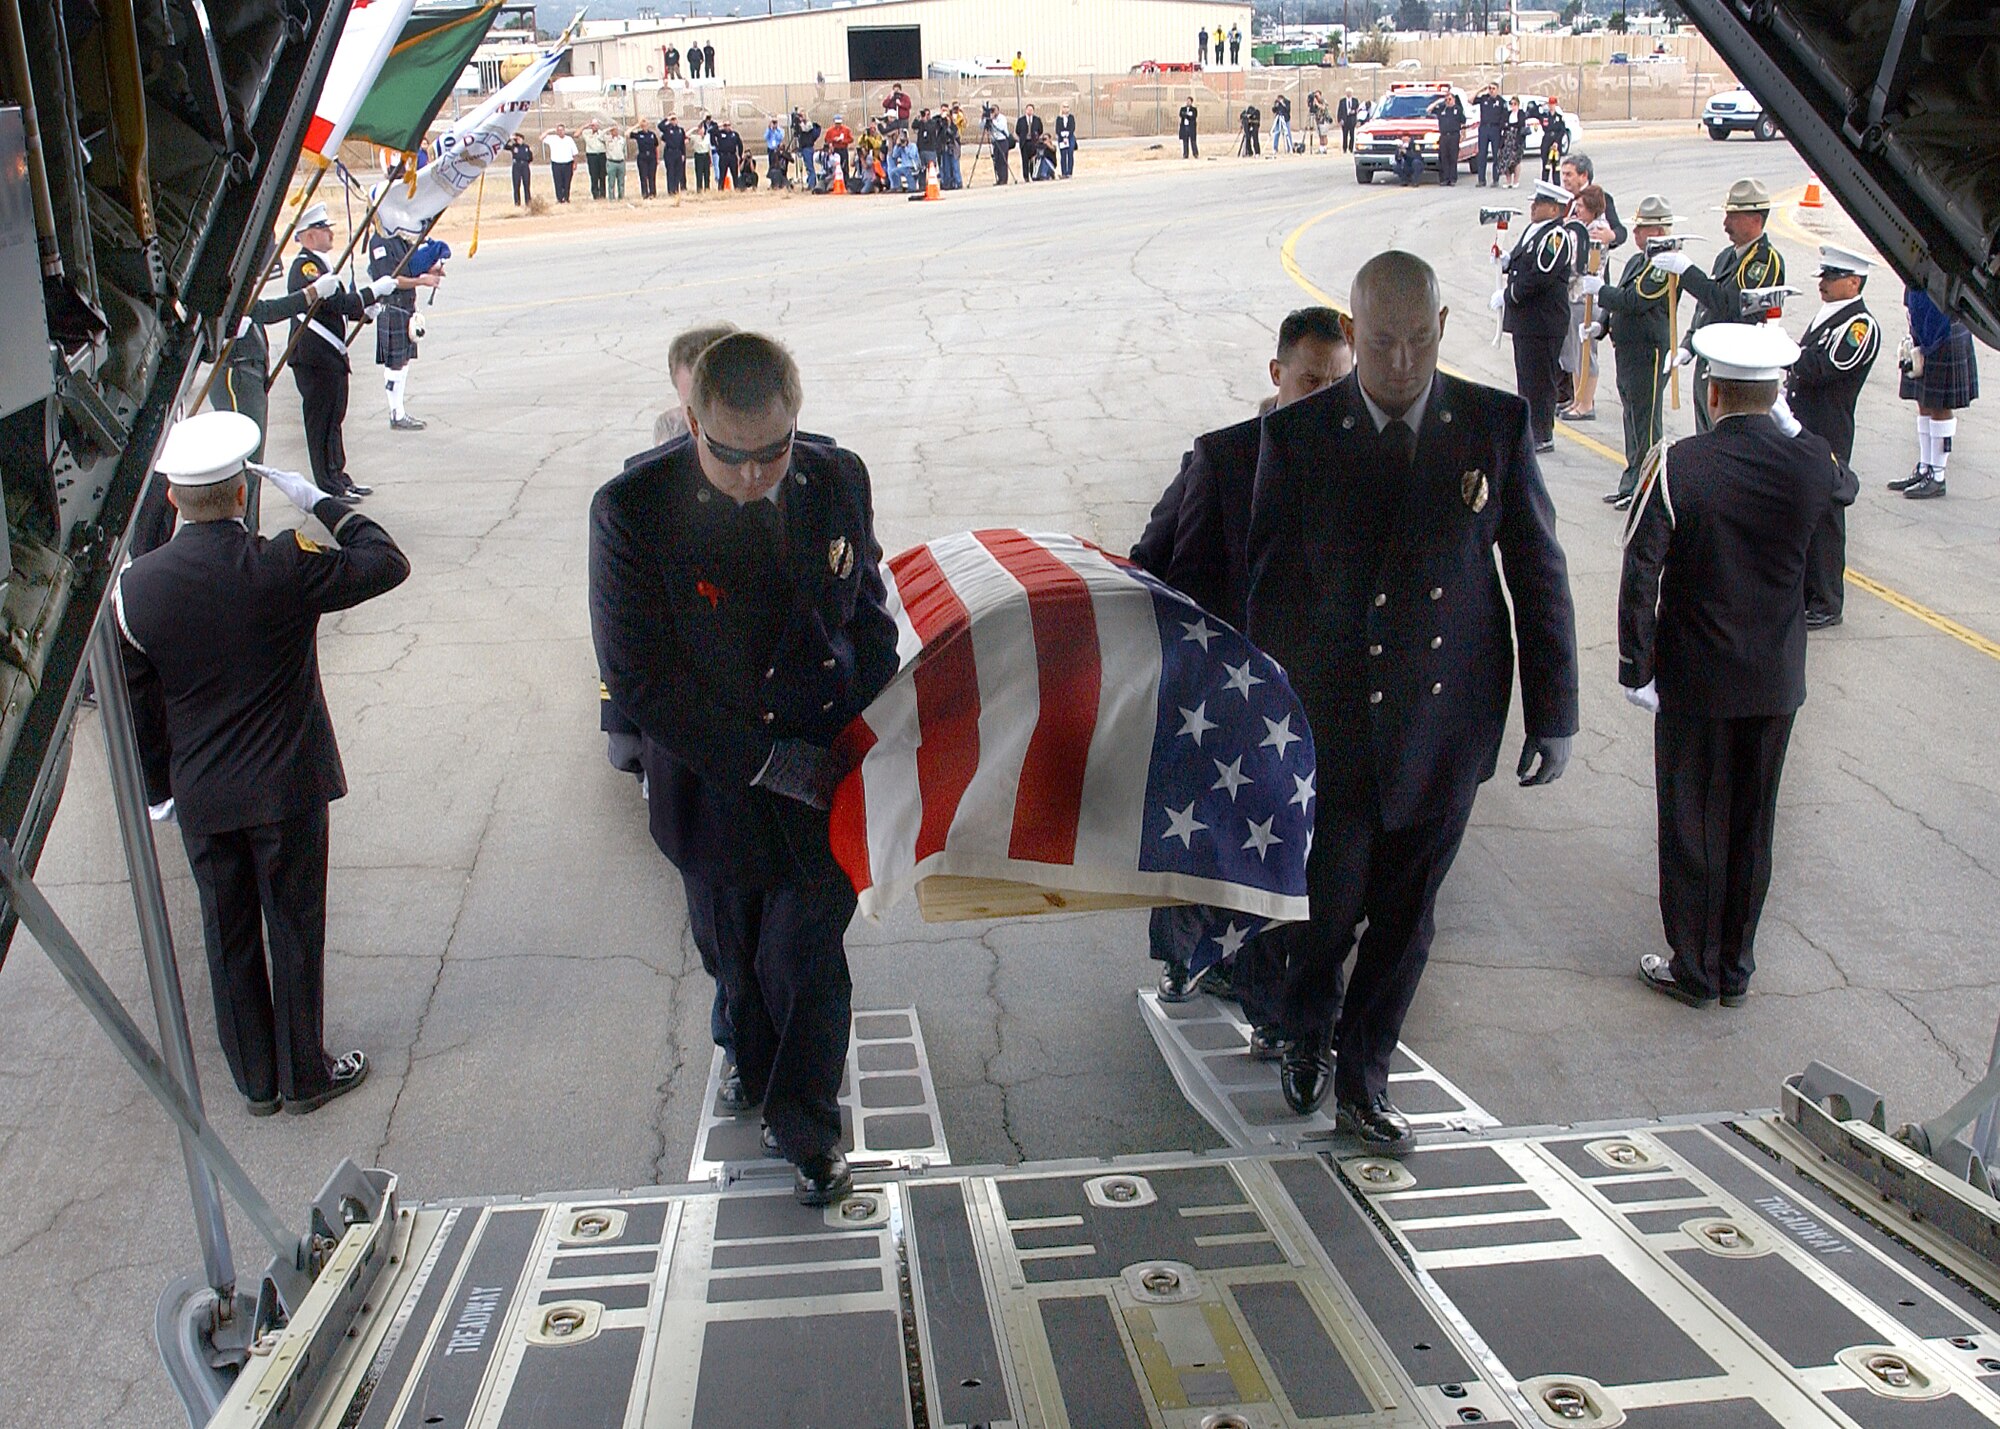 GILLESPIE FIELD AIRPORT, Calif.  -- Novato firefighters Shawn Kreps (left) and Barrett Smith lead pallbearers carrying the casket of firefighter Steven Rucker into the cargo area of an Air Force C-130 Hercules here.  Rucker, an engineer with the Novato Fire Protection District, died Oct. 29 in San Diego County's Cedar fire.  Kreps, Smith and Capt. Doug McDonald survived the fire that claimed Rucker's life.  (U.S. Air Force photo by Staff Sgt. Alex J. Koenig)